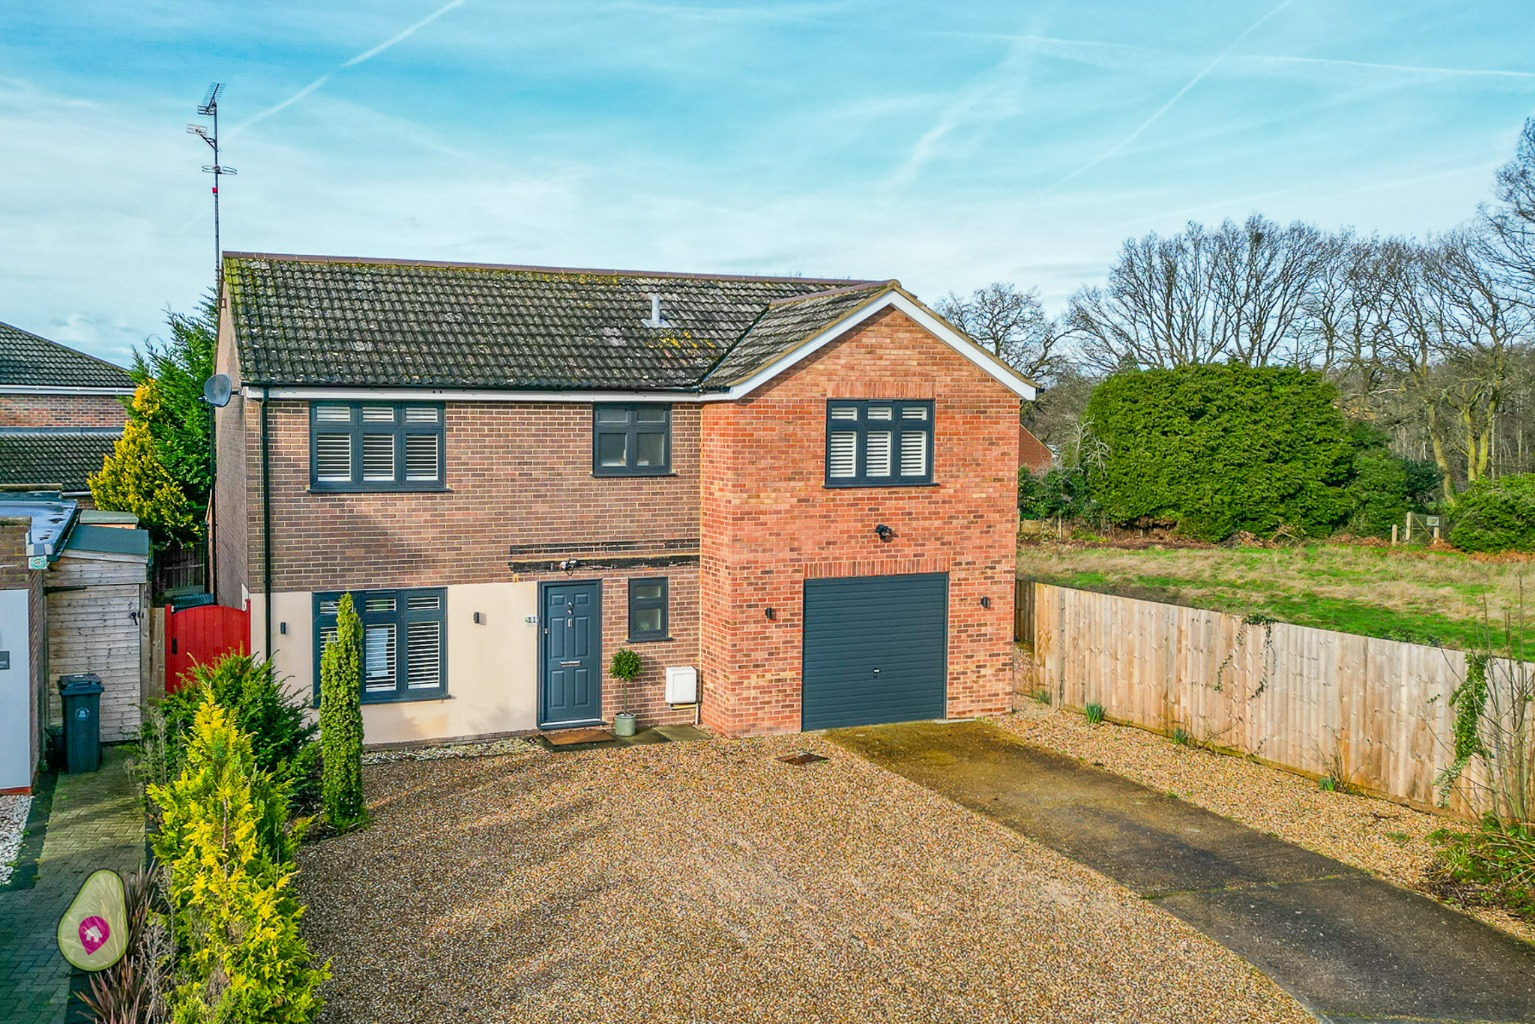 4 bed detached house for sale in Kilmartin Gardens, Camberley  - Property Image 1